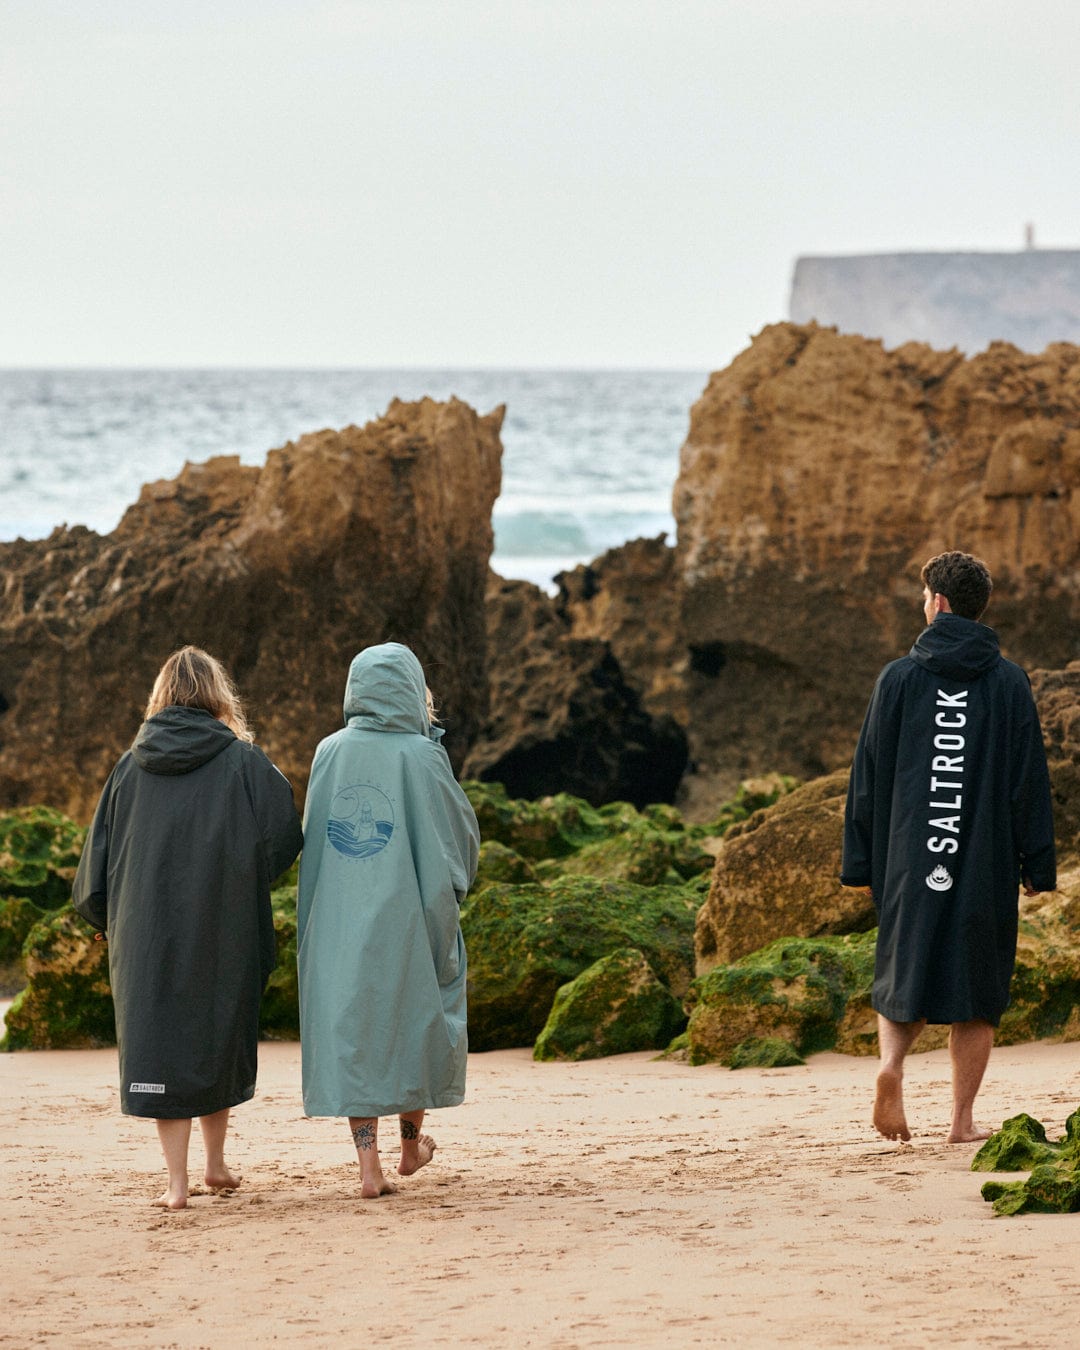 Three individuals in Saltrock Recycled Four Seasons Changing Robbe - Green/Aztec with fleece lining walking on the beach.